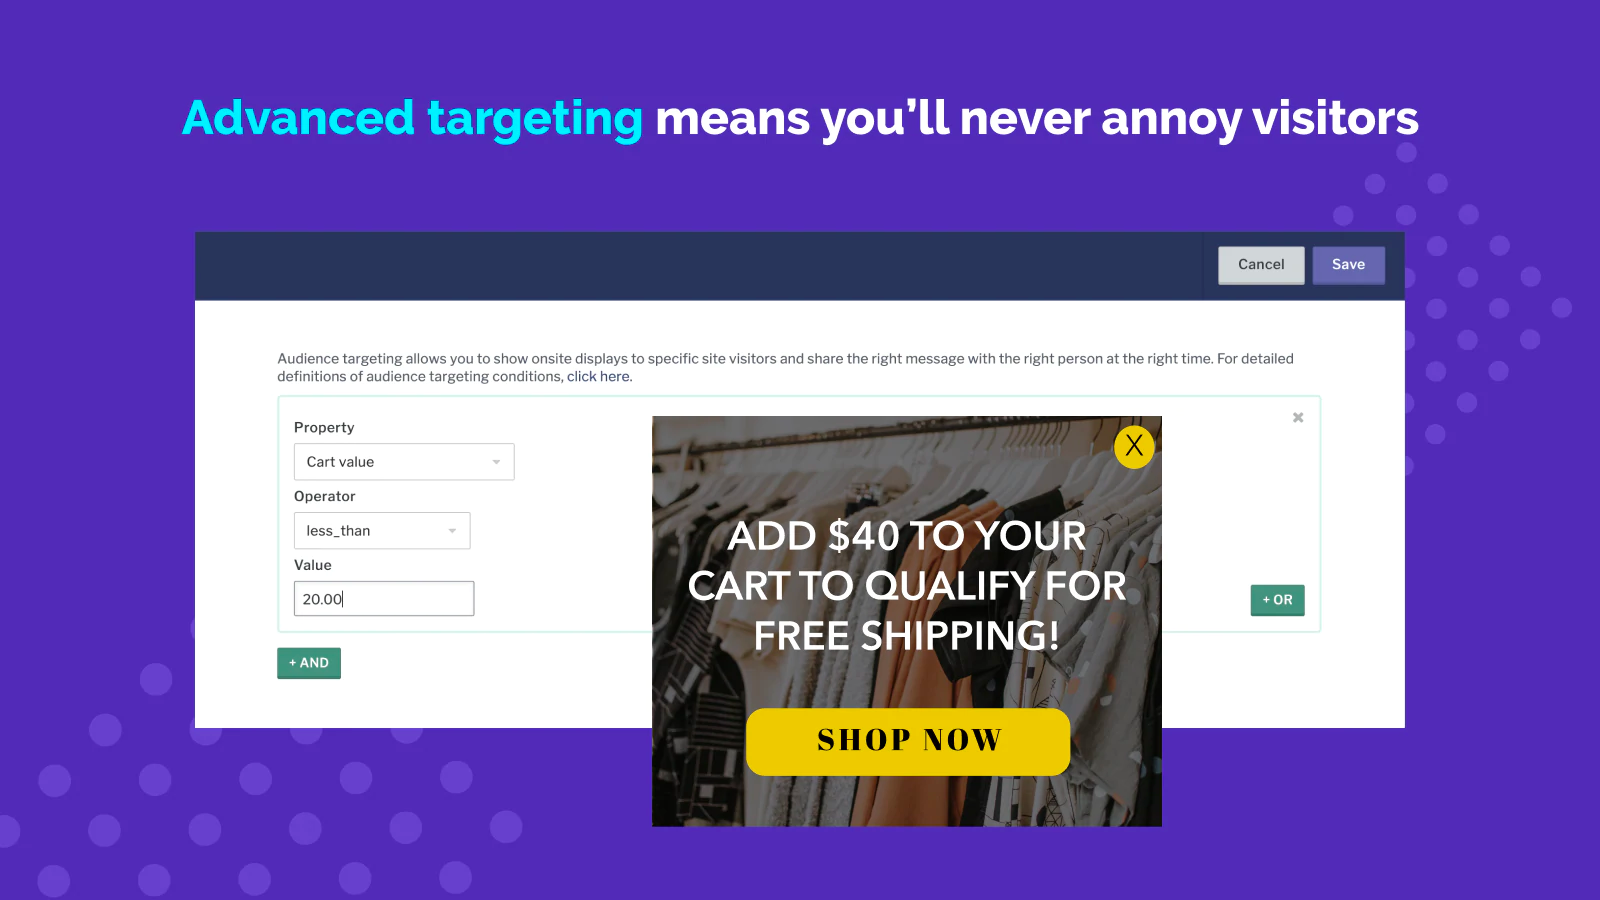 "Advanced targeting means you'll never annoy visitors" on top of Privy's advanced customer targeting tools.